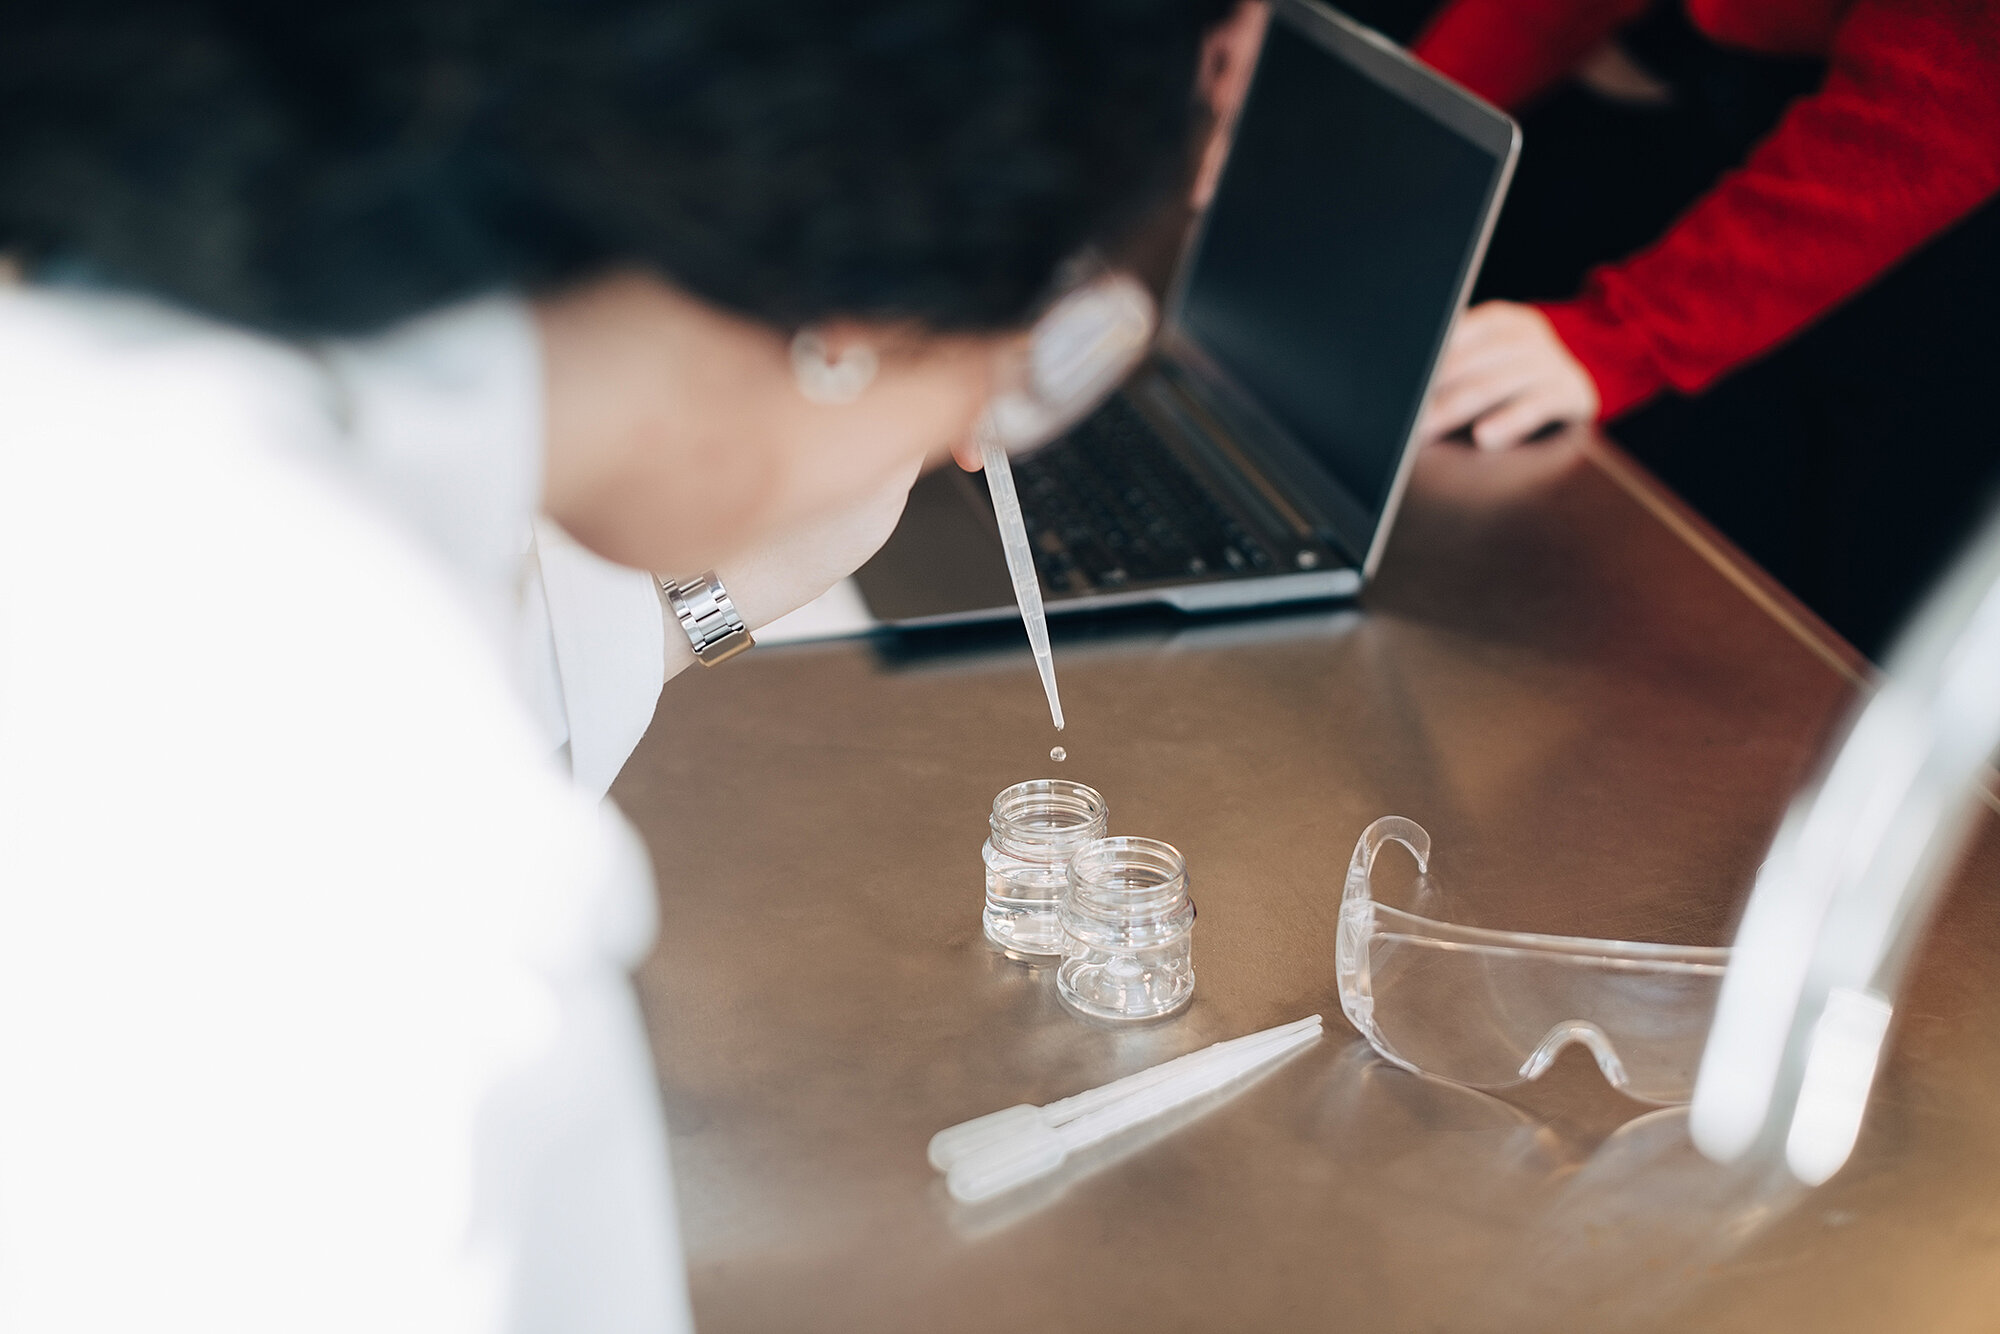 Chemists filling a test tube with a pipette